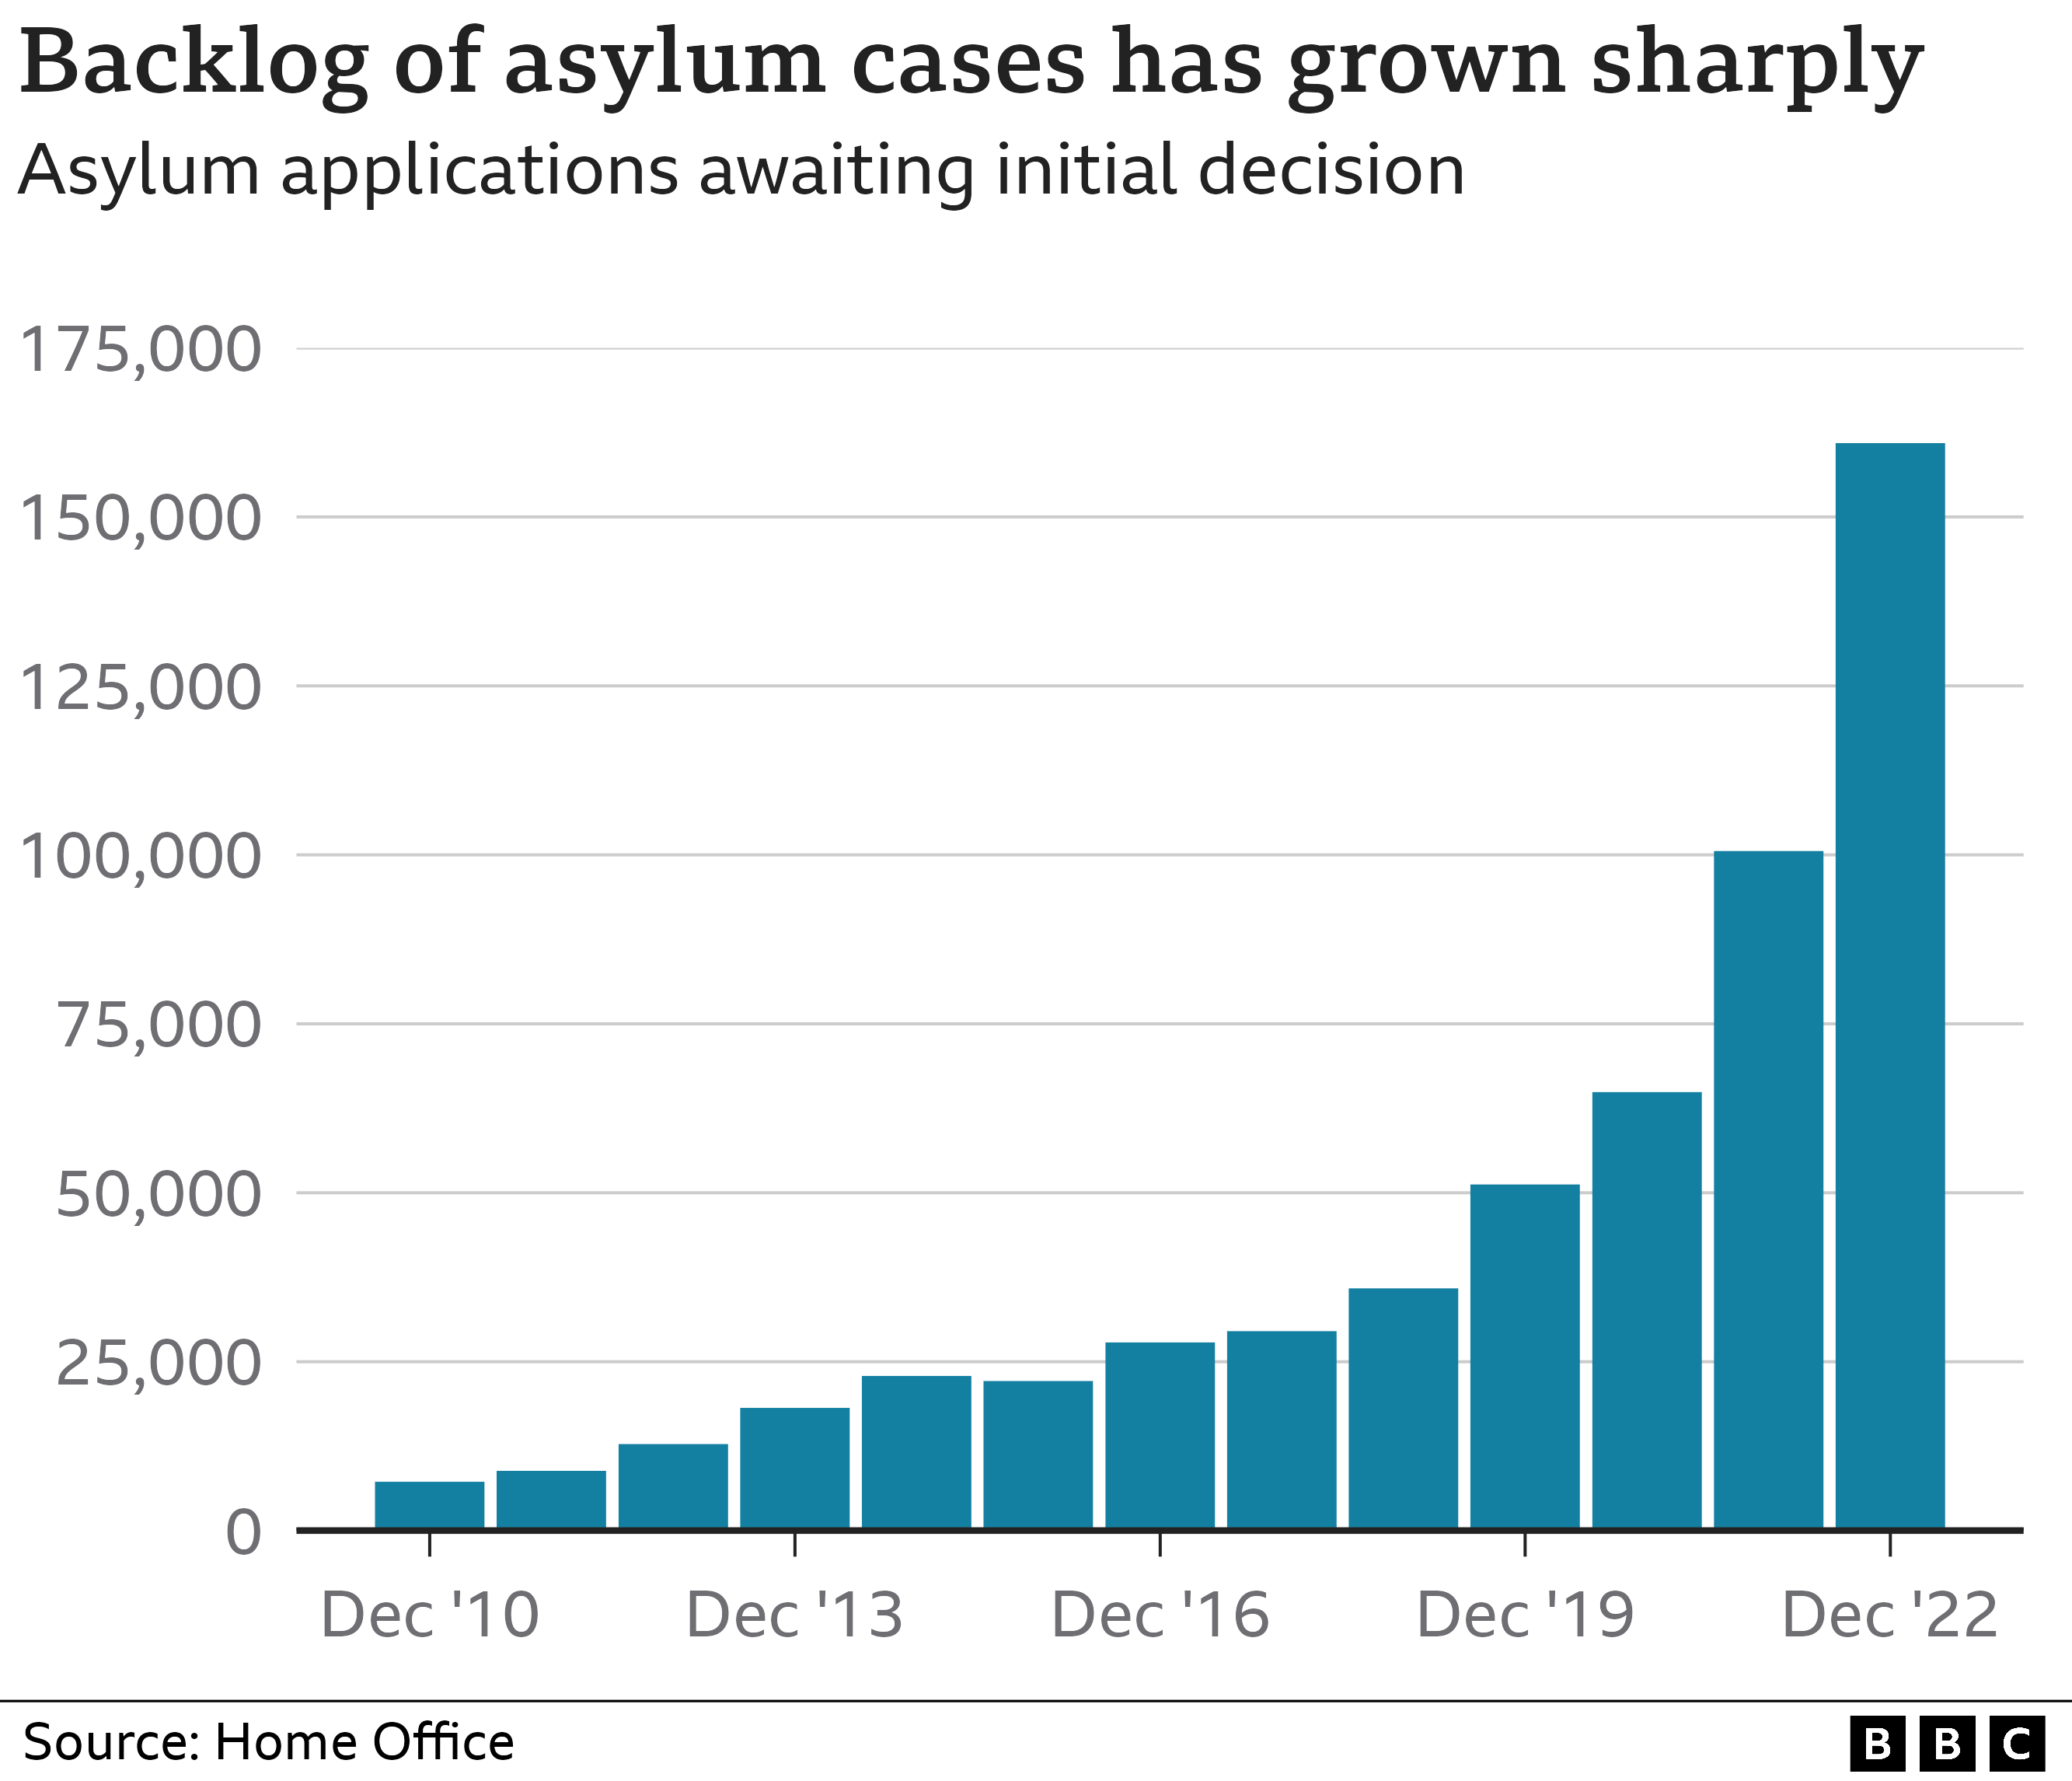 Graphic showing sharp growth in asylum backlog since 2010